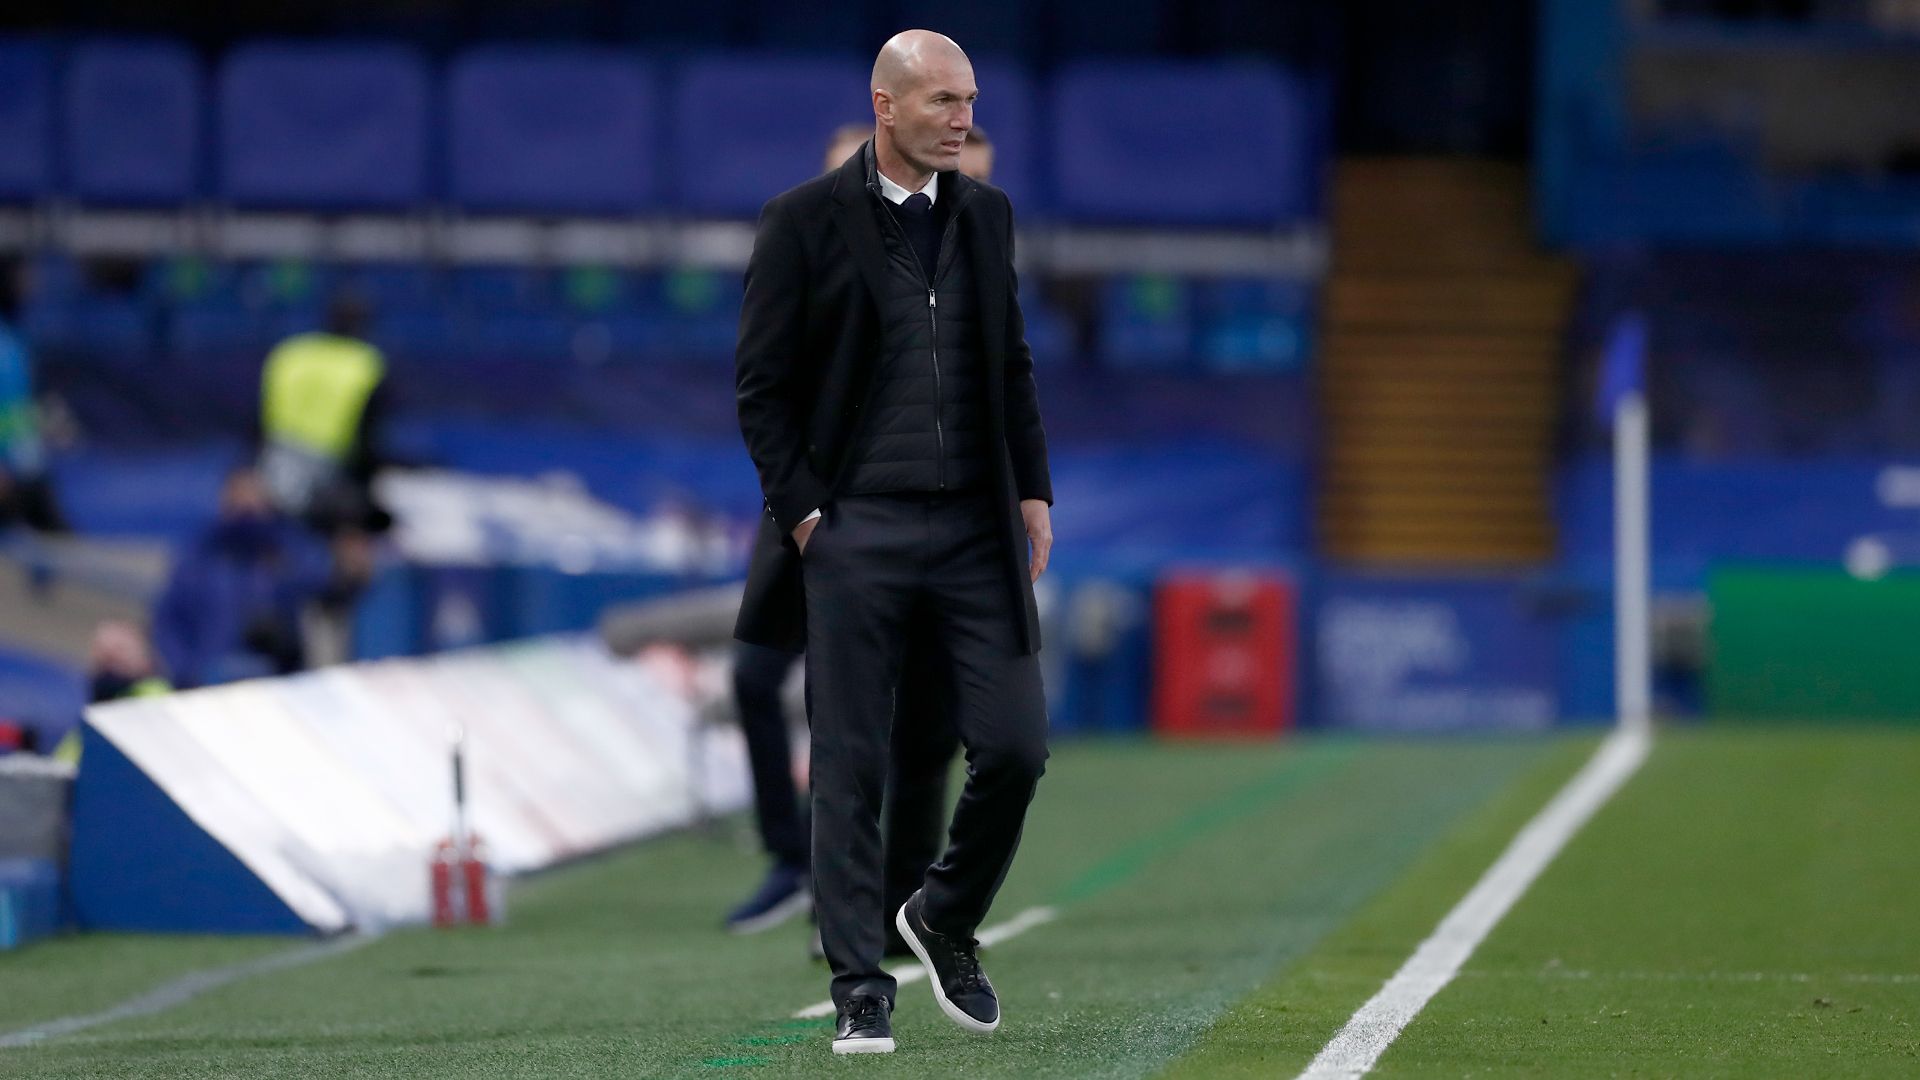 Real Madrid manager Zinedine Zidane on the touchline; Credit: Real Madrid Twitter